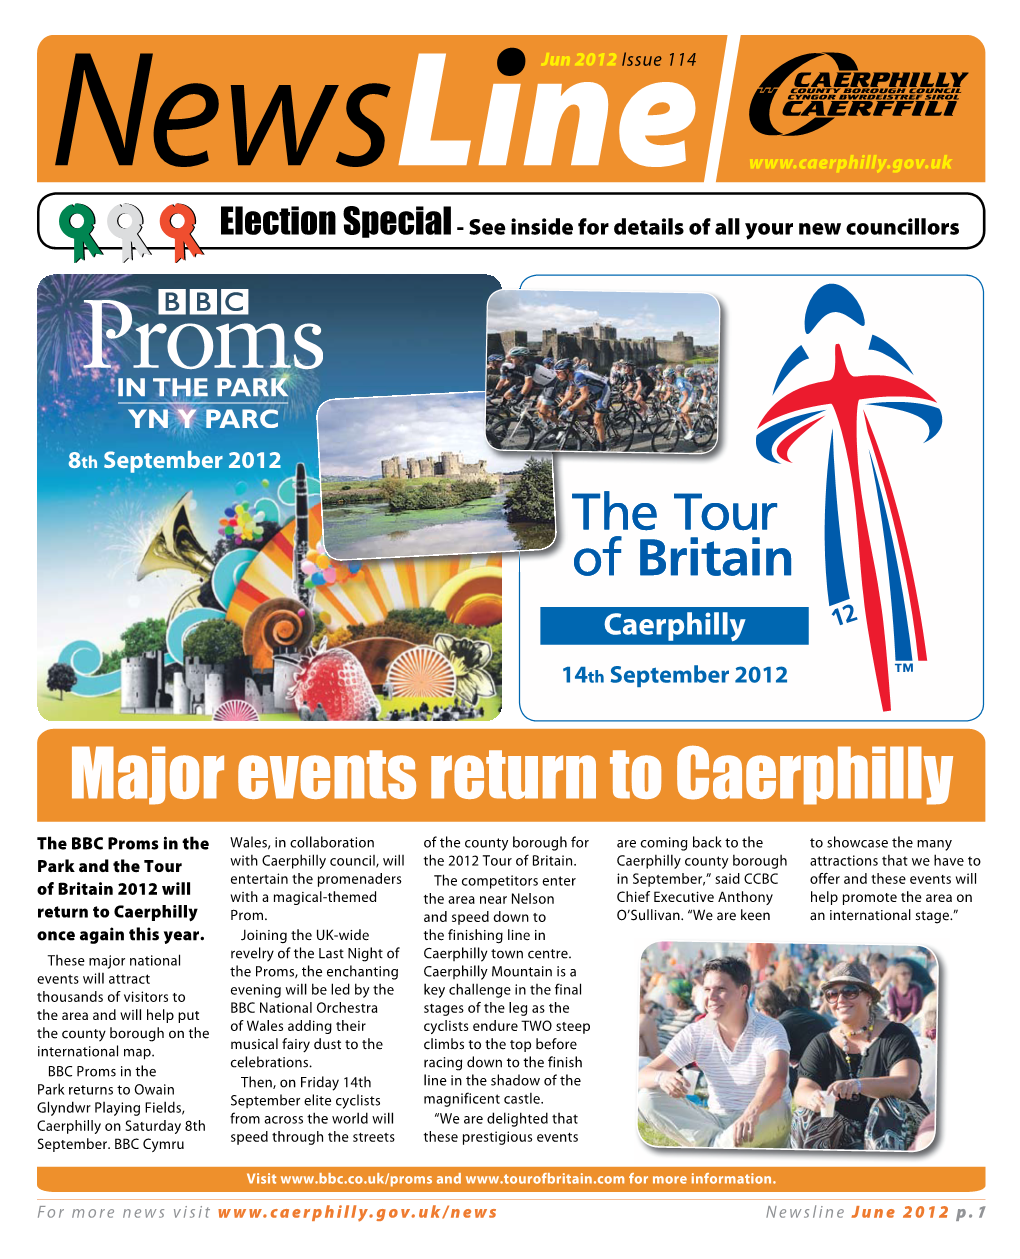 Major Events Return to Caerphilly